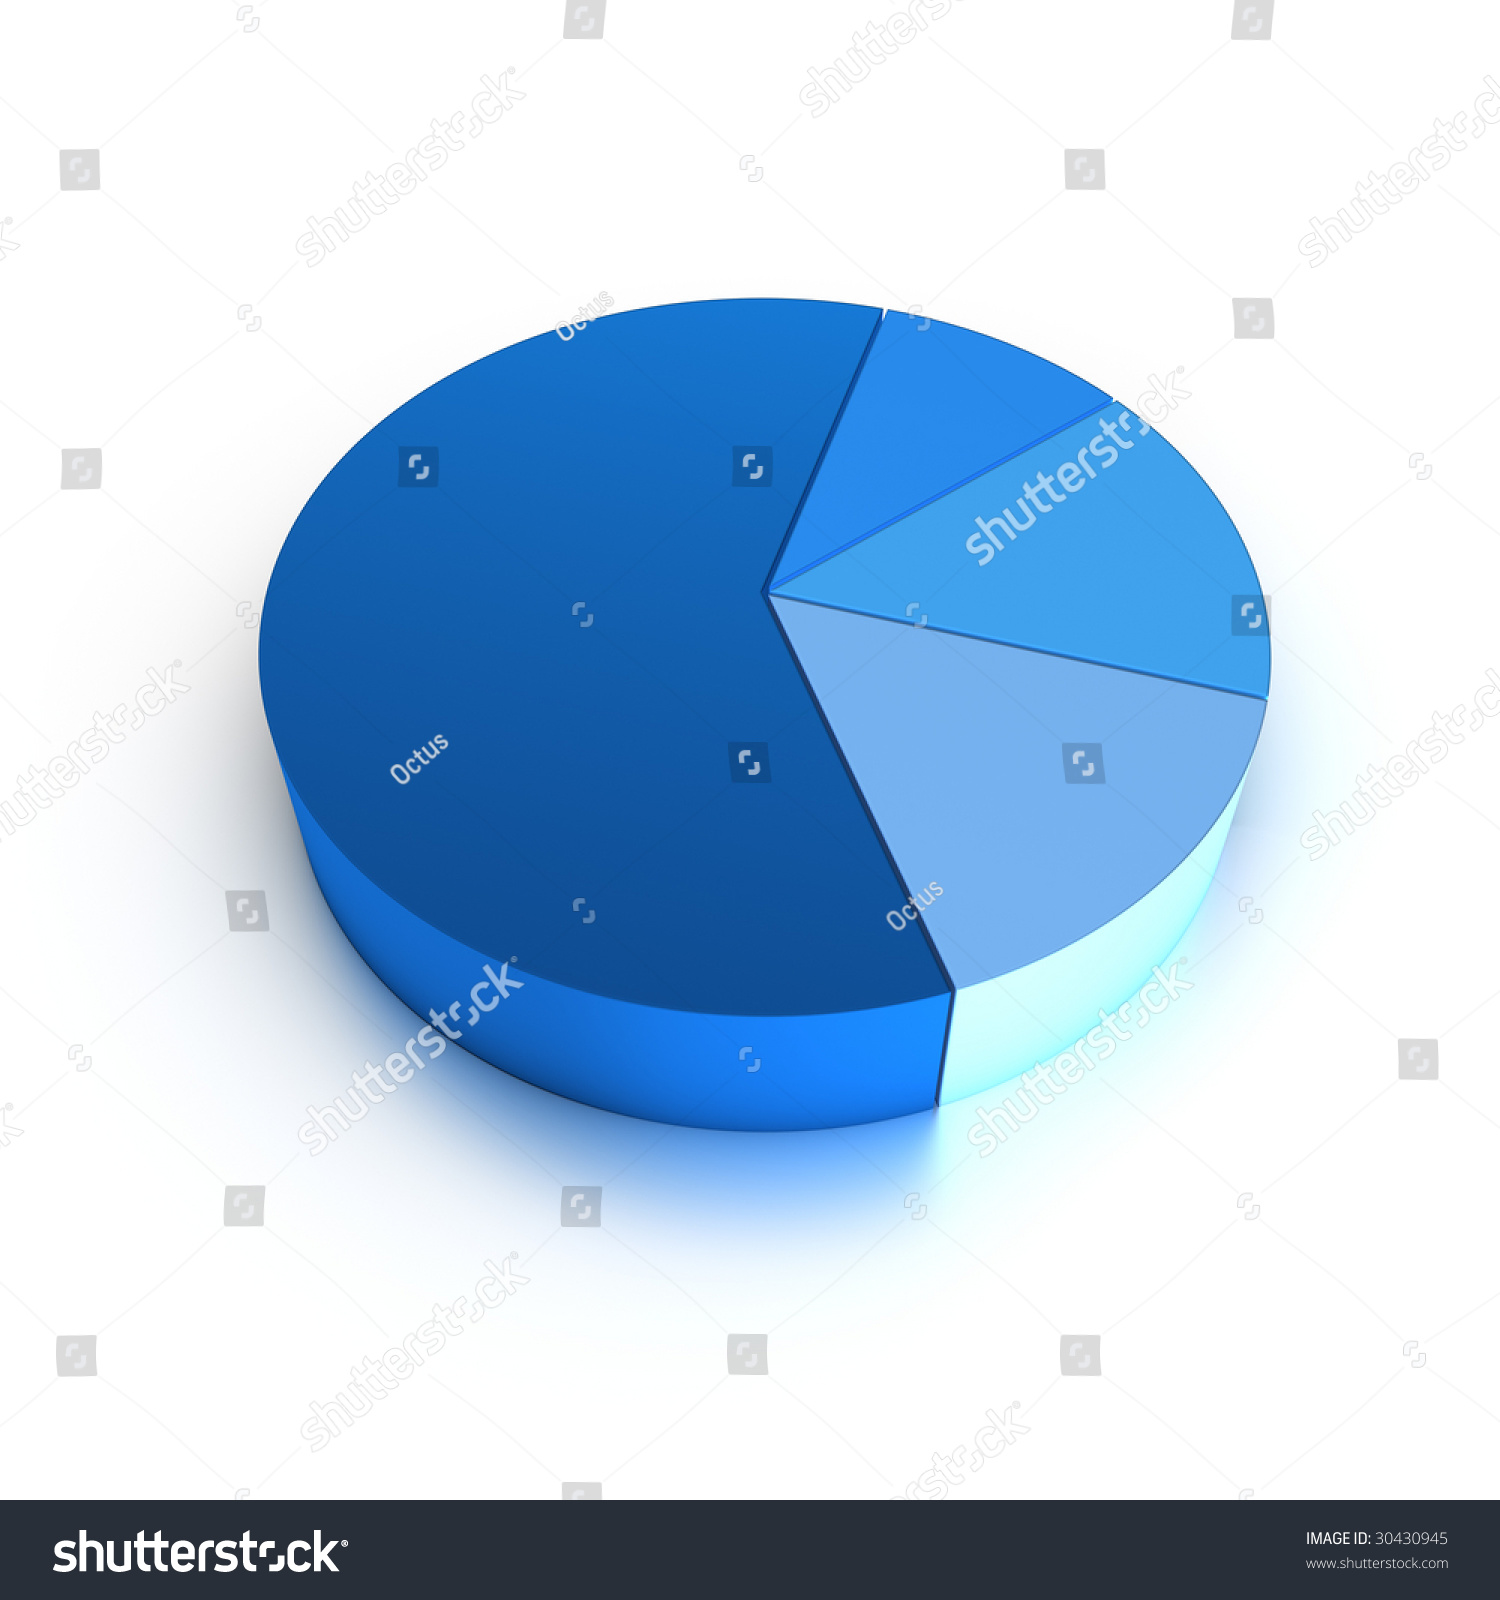 Blue Pie Chart Isolated On White. Stock Photo 30430945 : Shutterstock